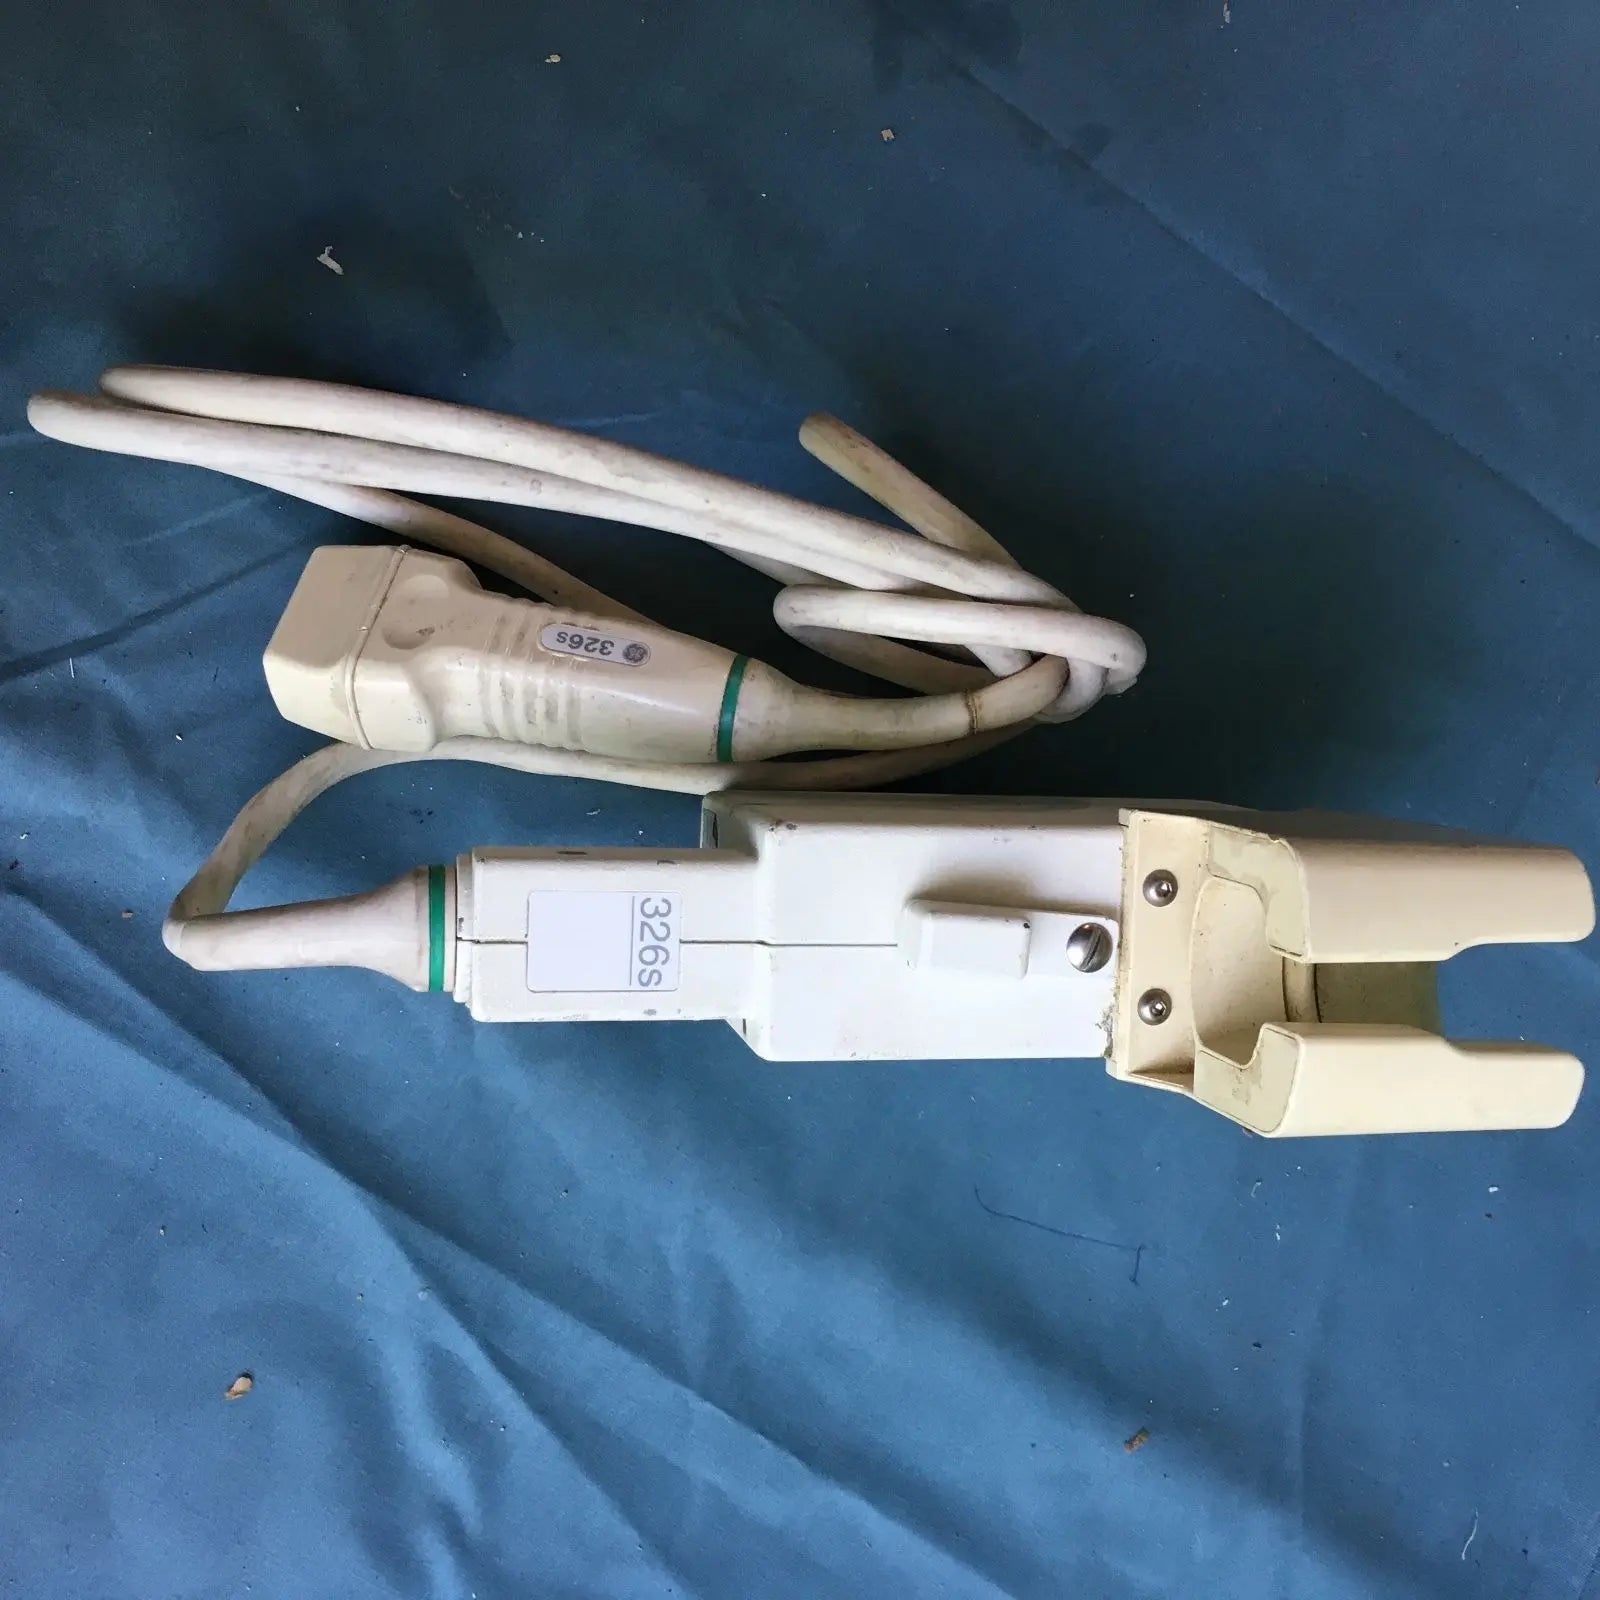 GE Medical Systems 326s Ultrasound Transducer Probe Model 46-326135 DIAGNOSTIC ULTRASOUND MACHINES FOR SALE